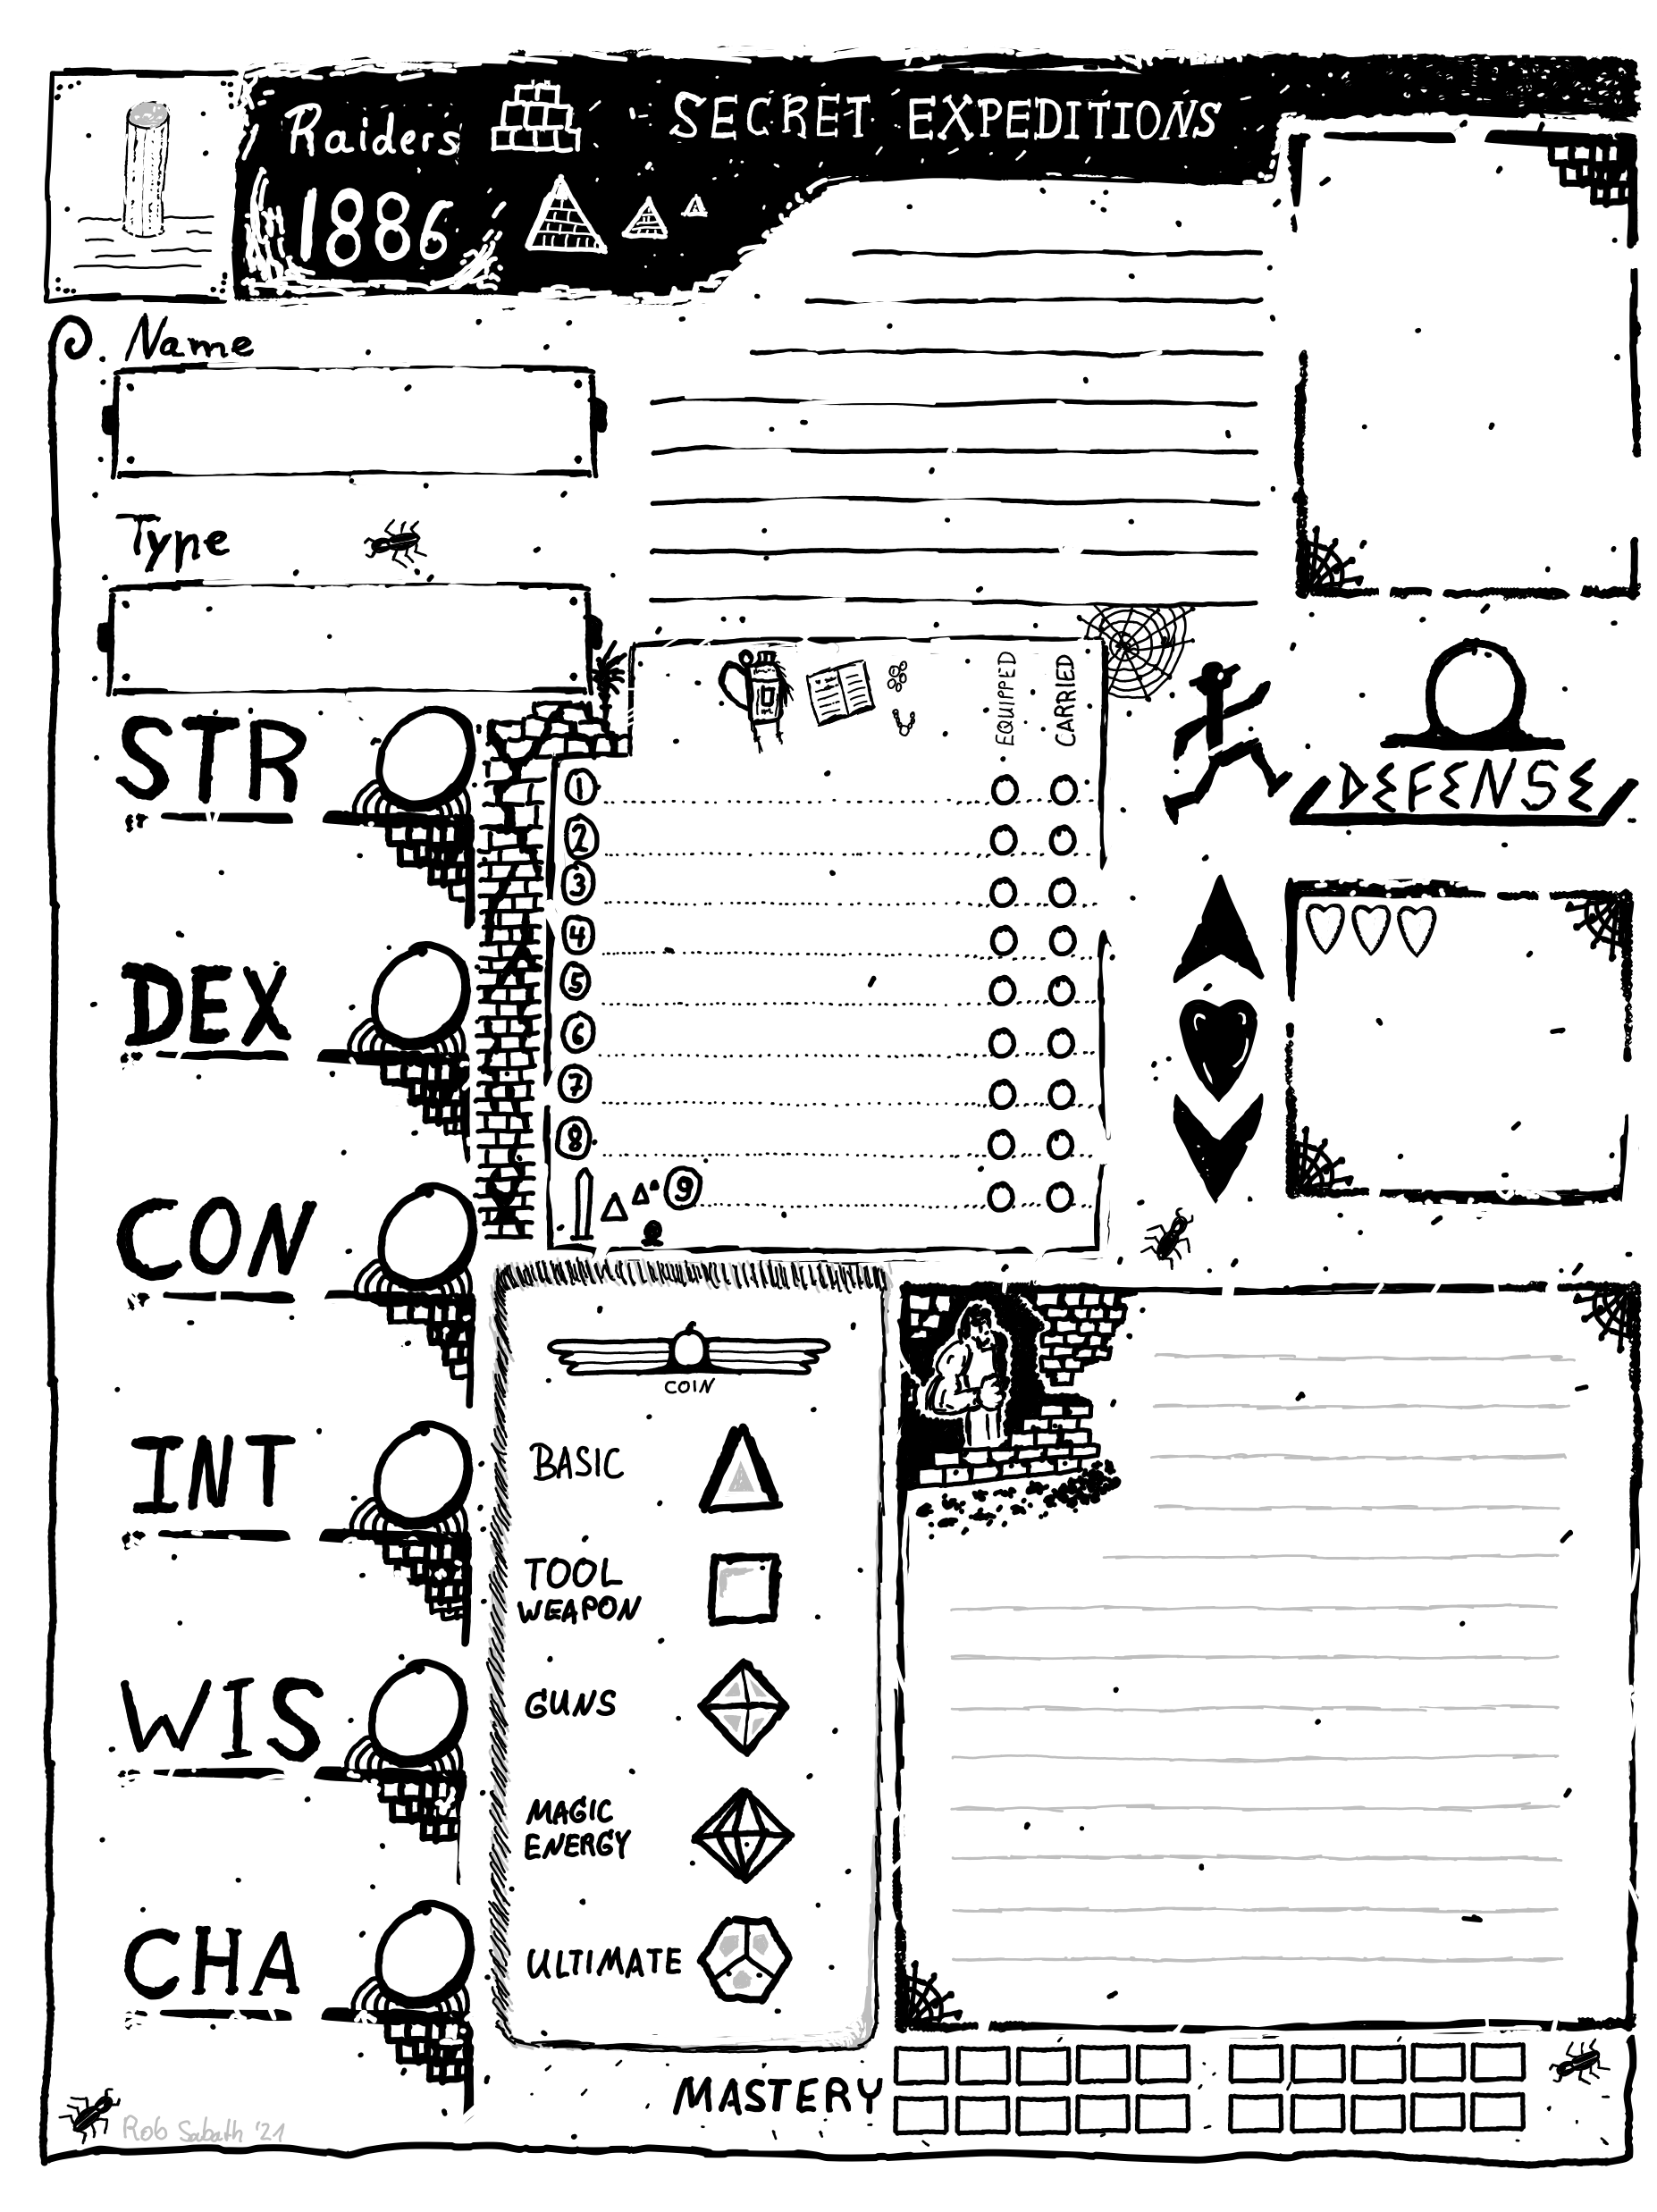 Updates to our Call of Cthulhu Character Sheet